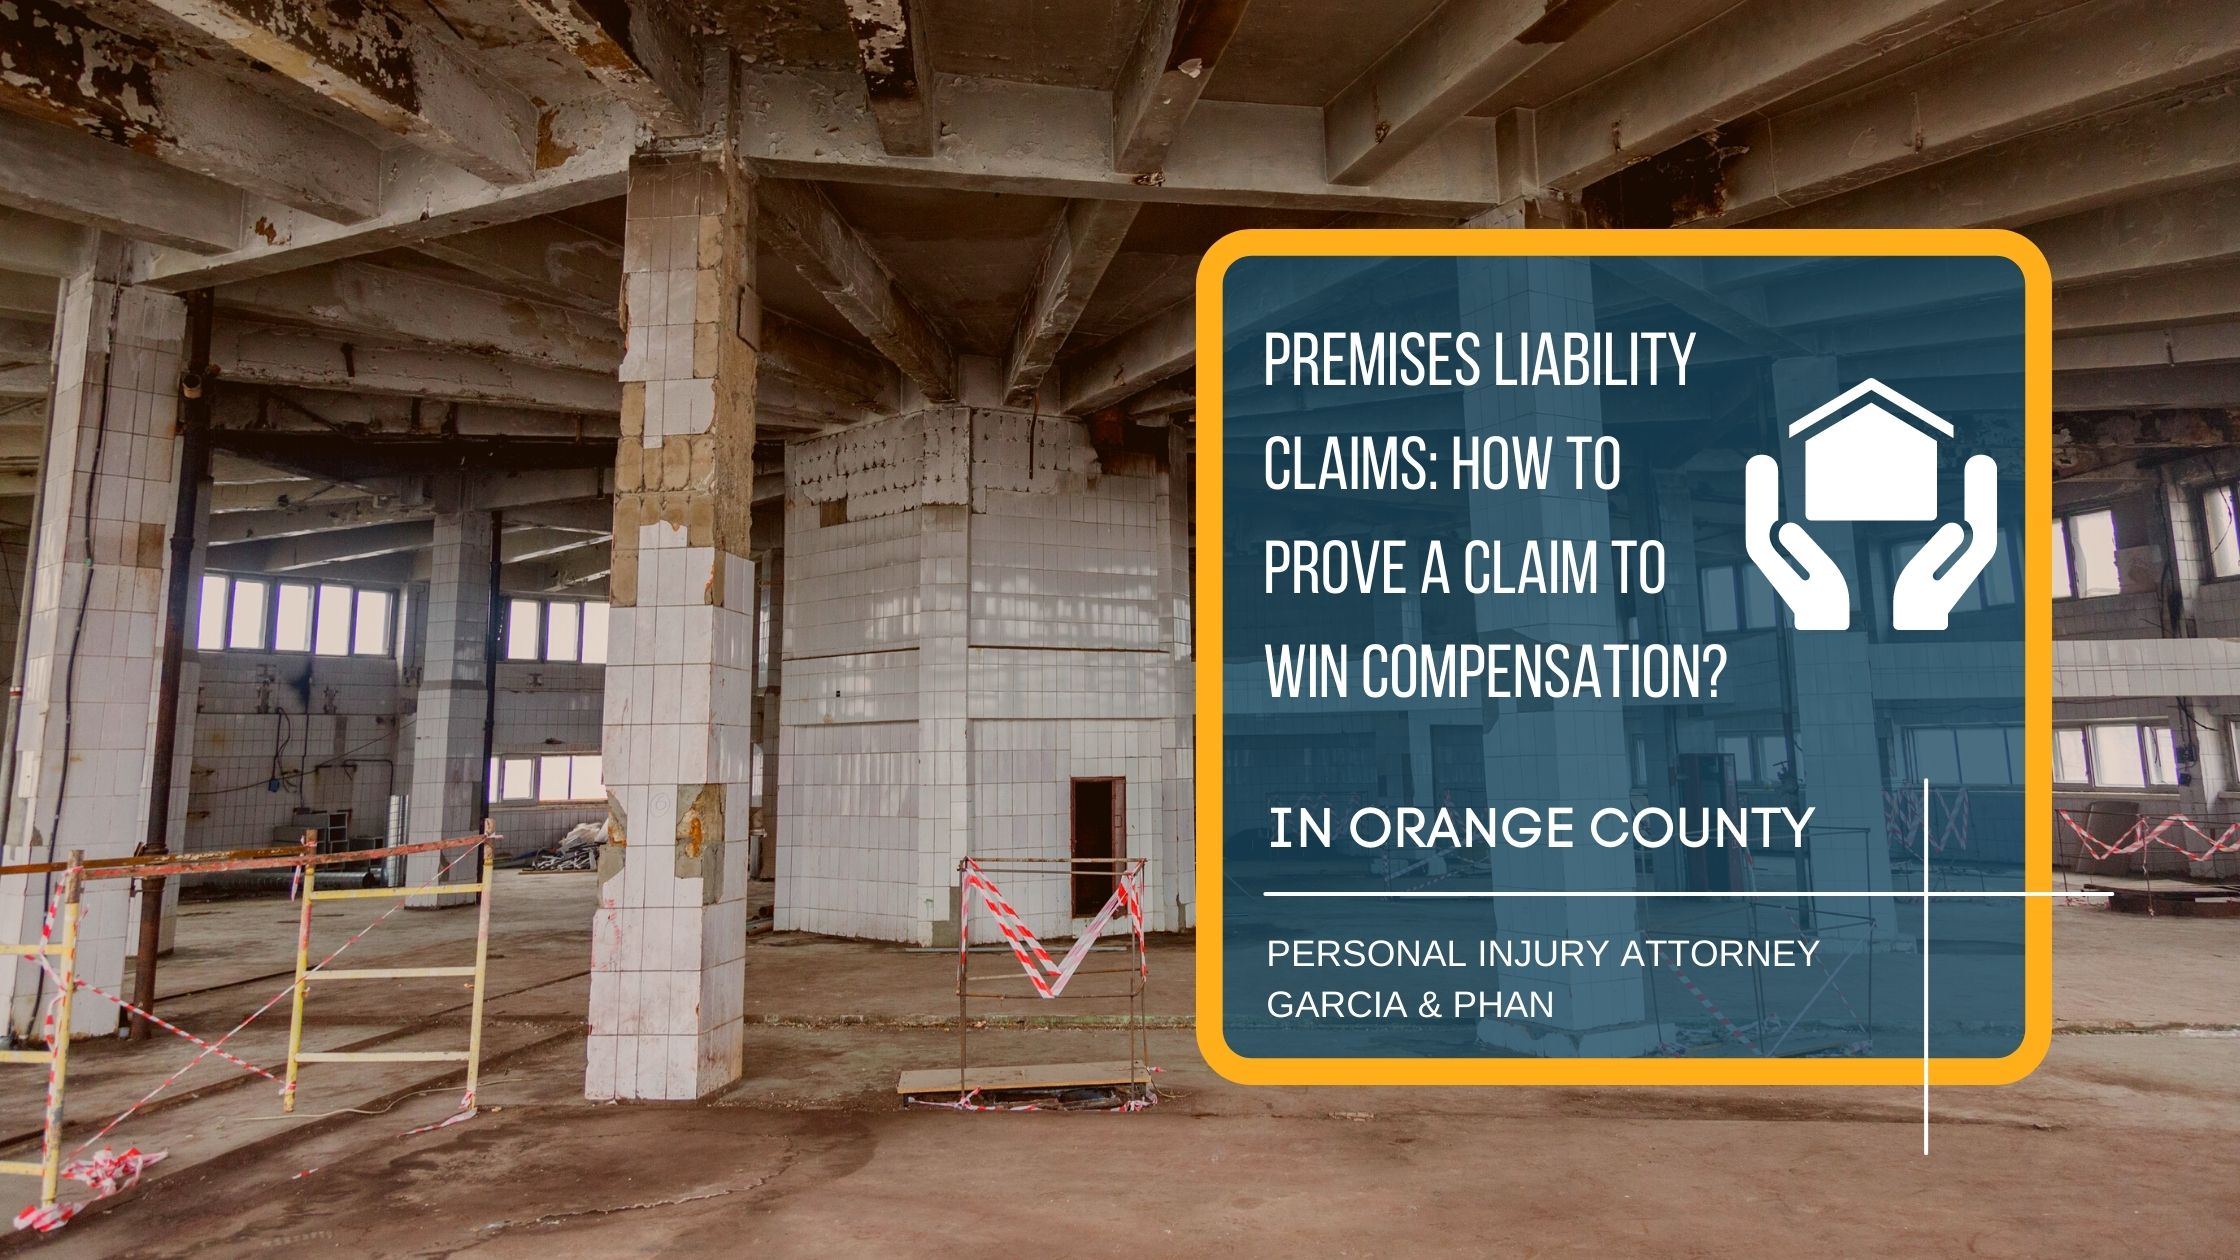 Premises Liability Claims | Garcia Phan Personal Injury Attorney